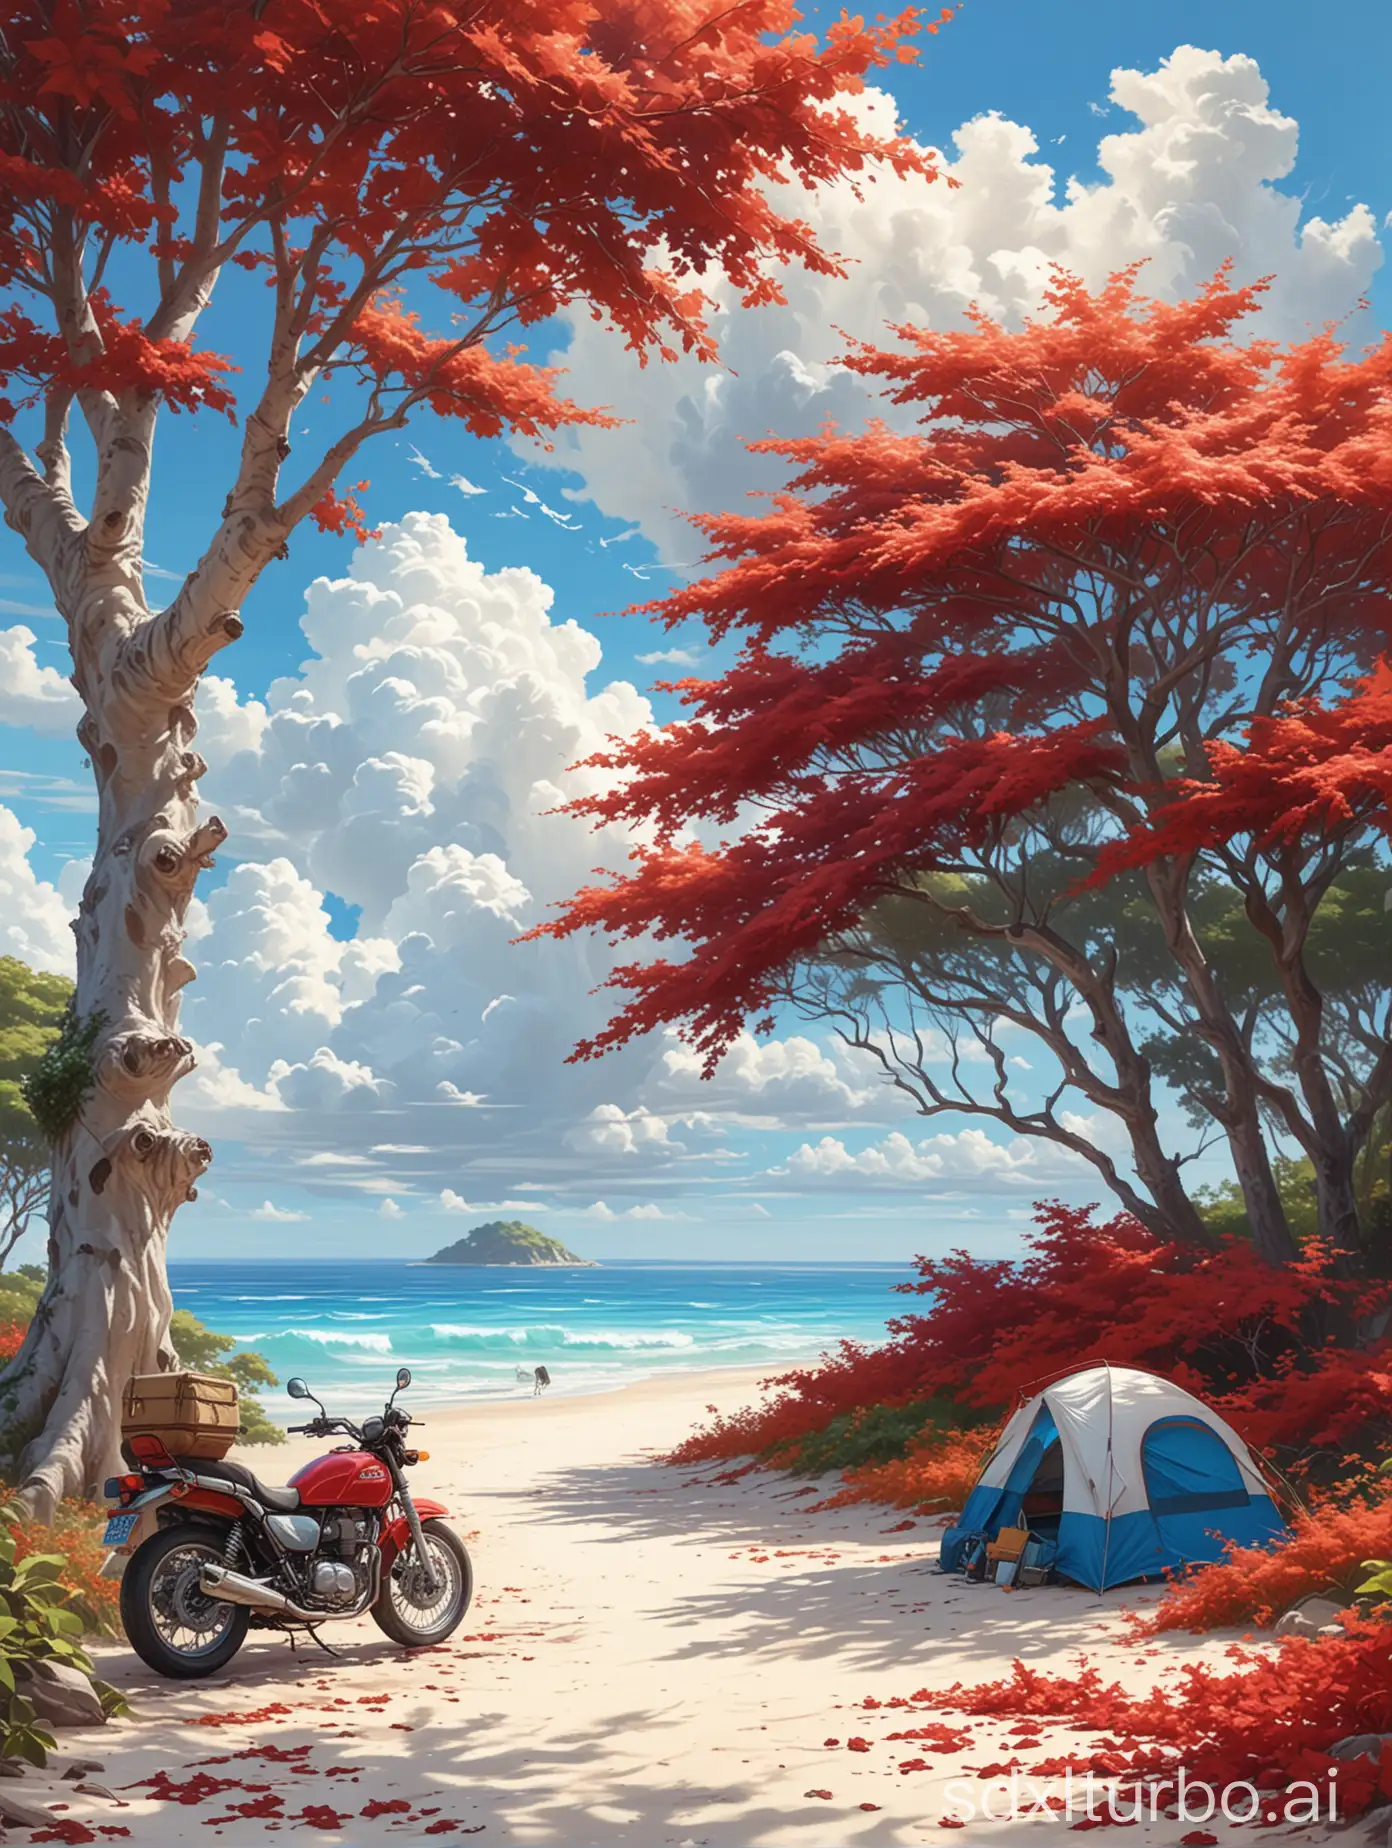 A digital painting style,a vivid bright fluffy cloudy white clouds,below is partially seen ocean and white sand shore and a huge tree with red leaves,a blue motorcycle parked and a camping tent